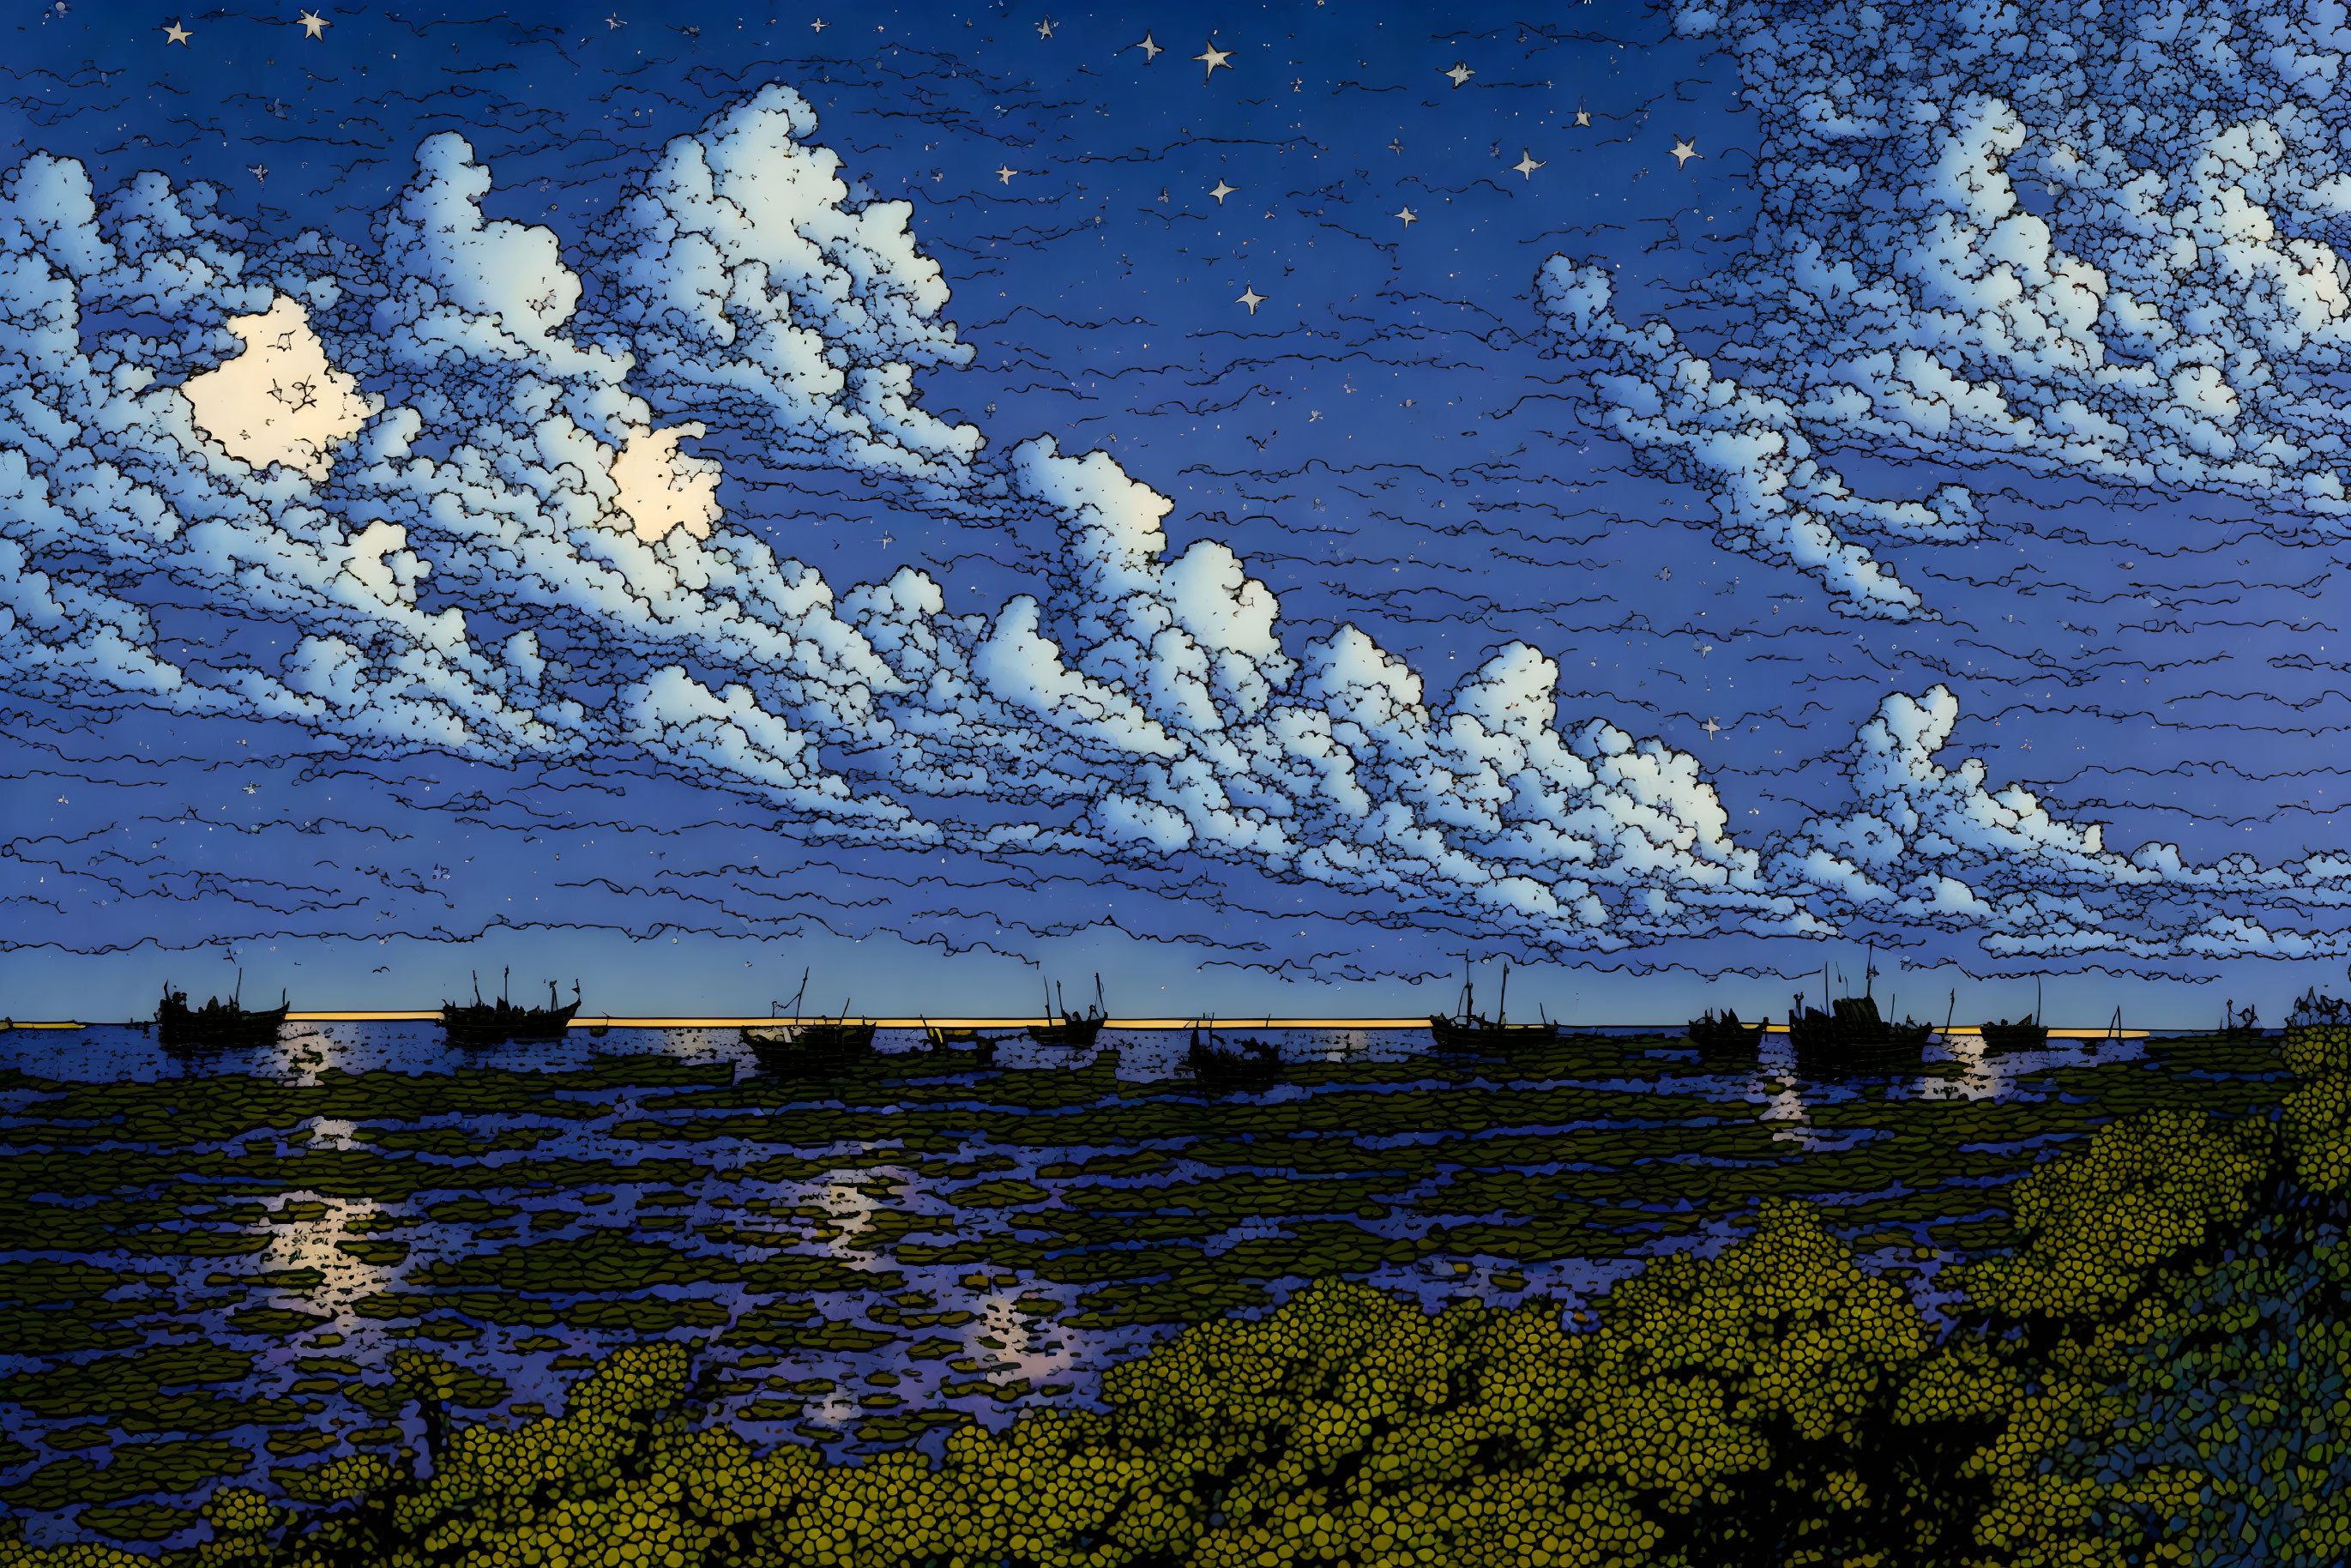 Stylized graphic of night skies with stars and wispy clouds